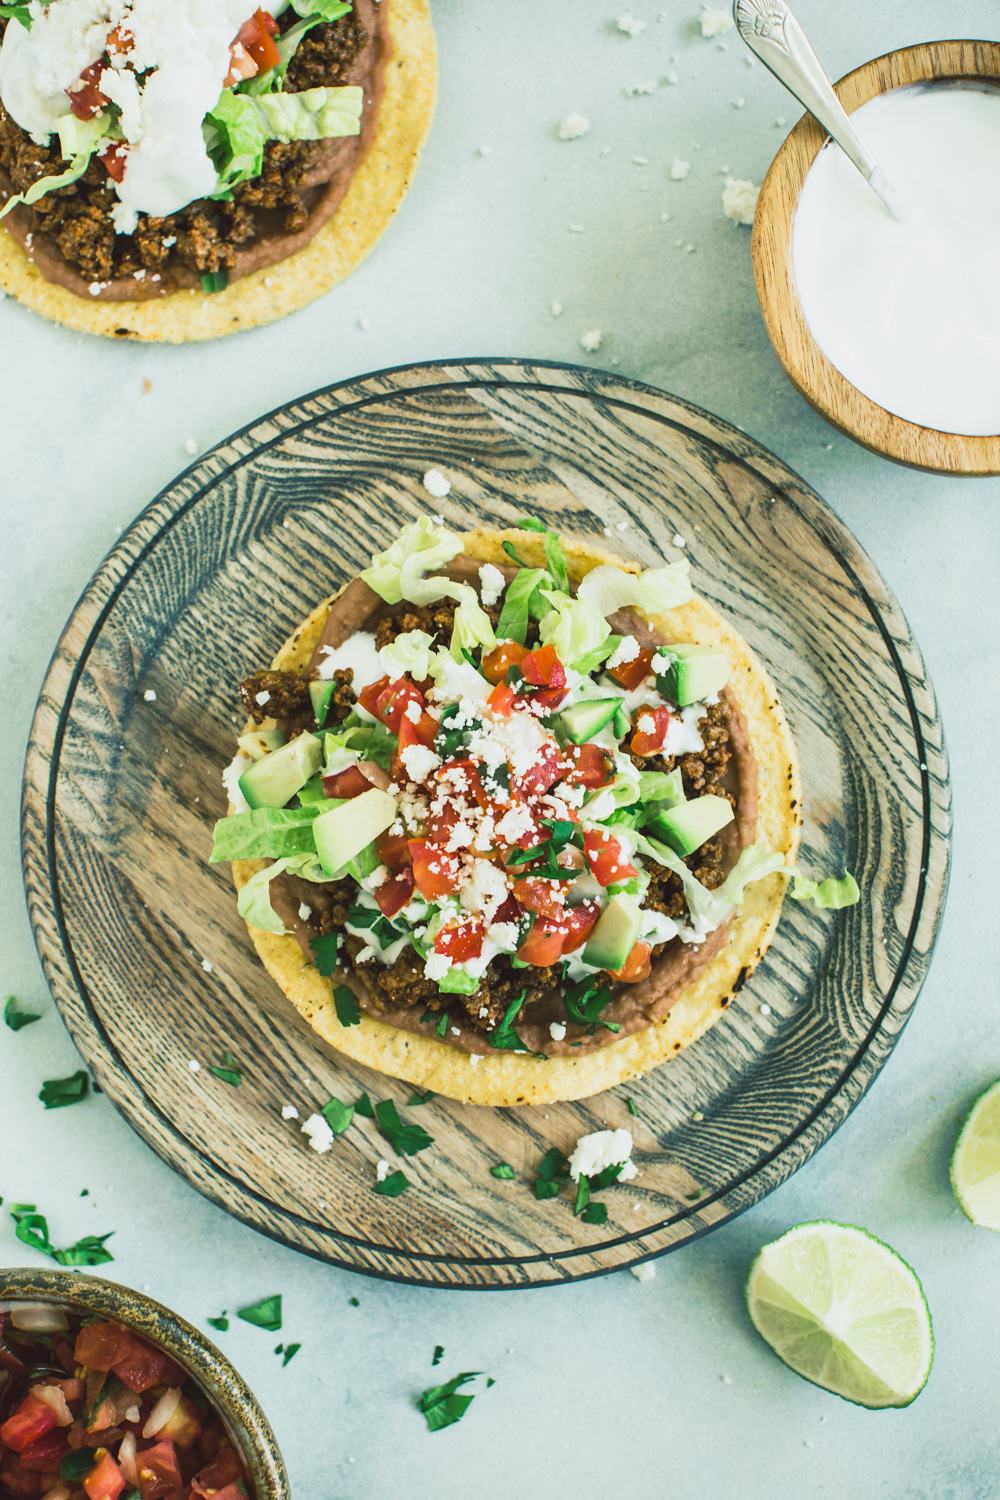 Ground beef tostada on a wooden plate.